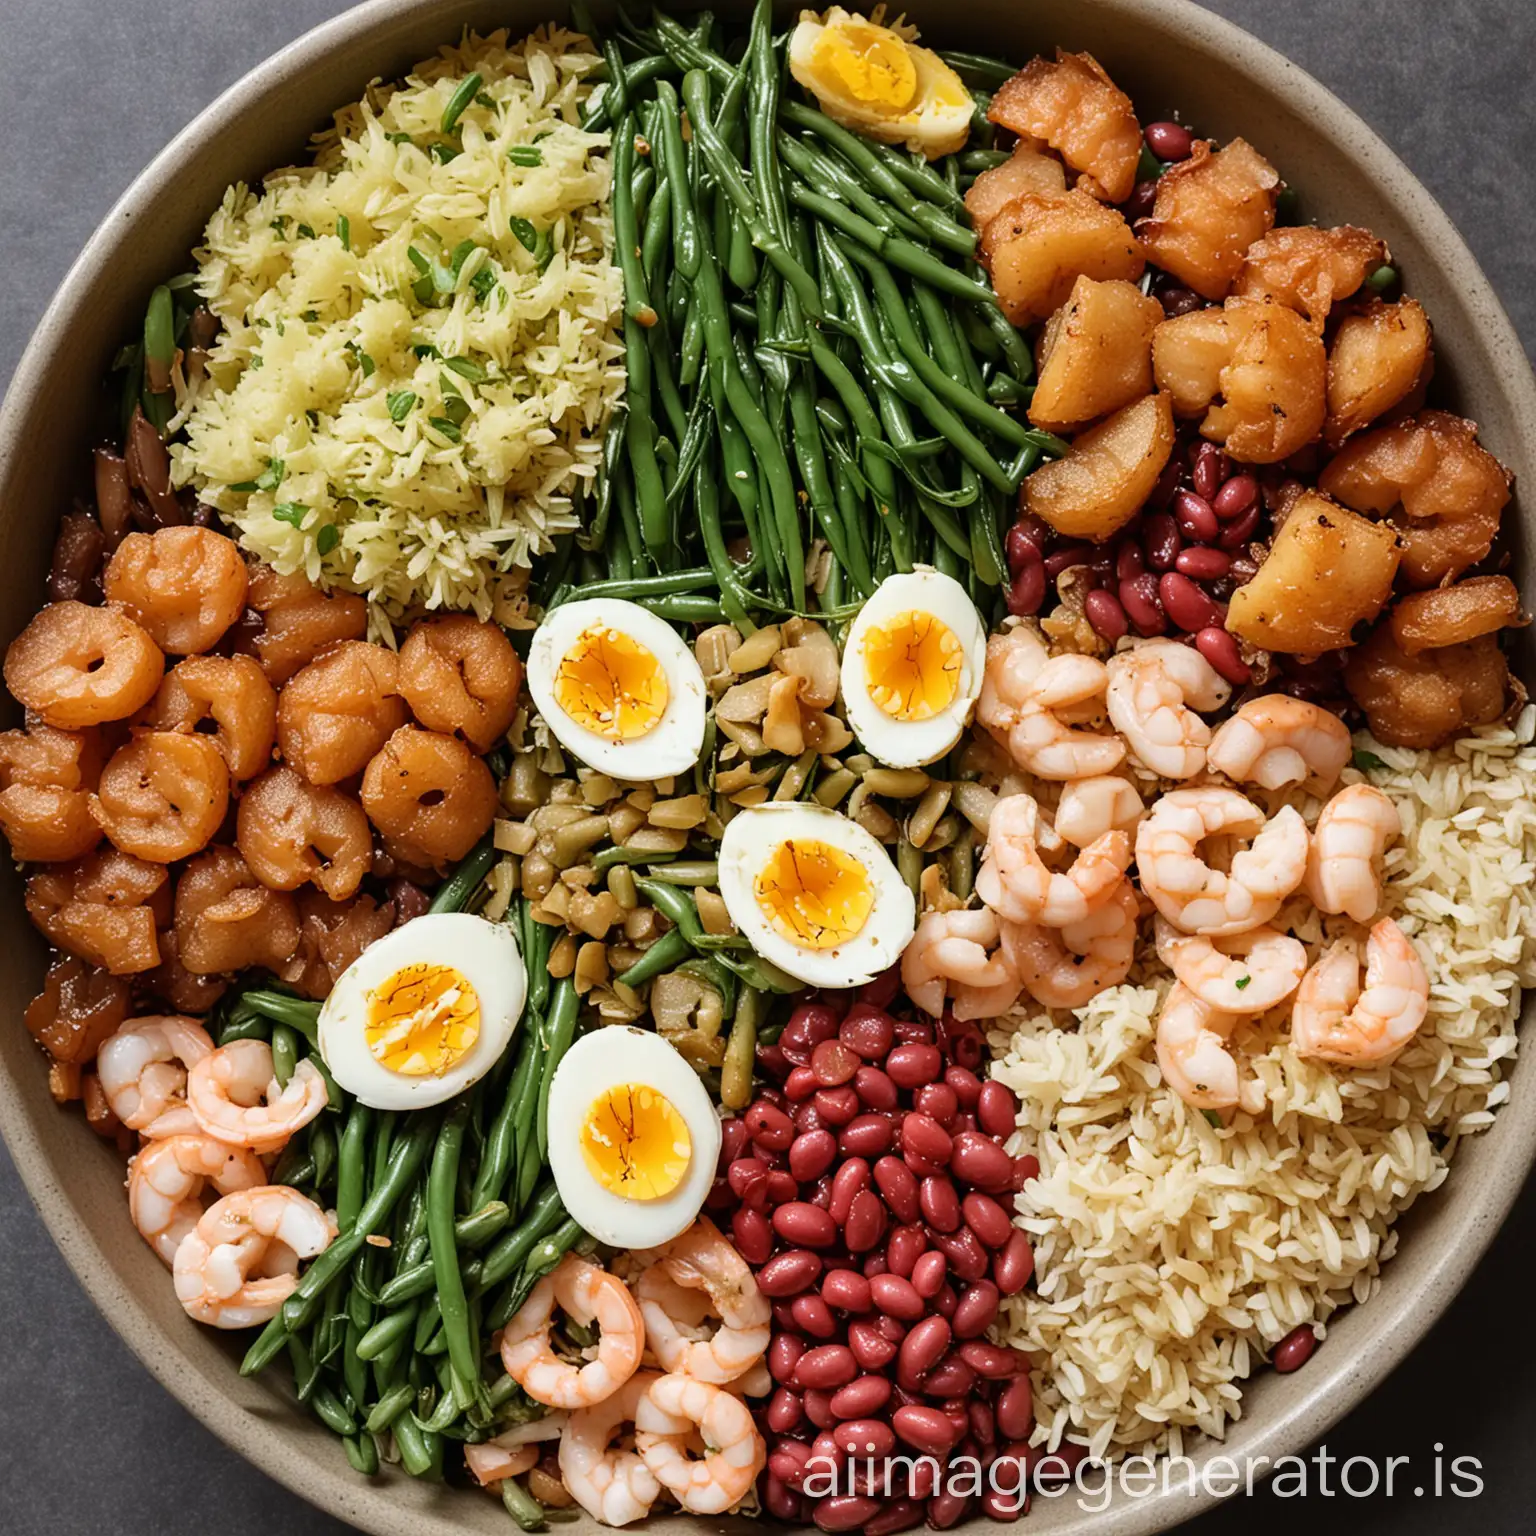 Colorful-Asian-Cuisine-Spread-Red-Bean-Rice-PanFried-Potatoes-Boiled-Shrimp-Boiled-Eggs-StirFry-Green-Beans-Loofah-Holy-Fruit